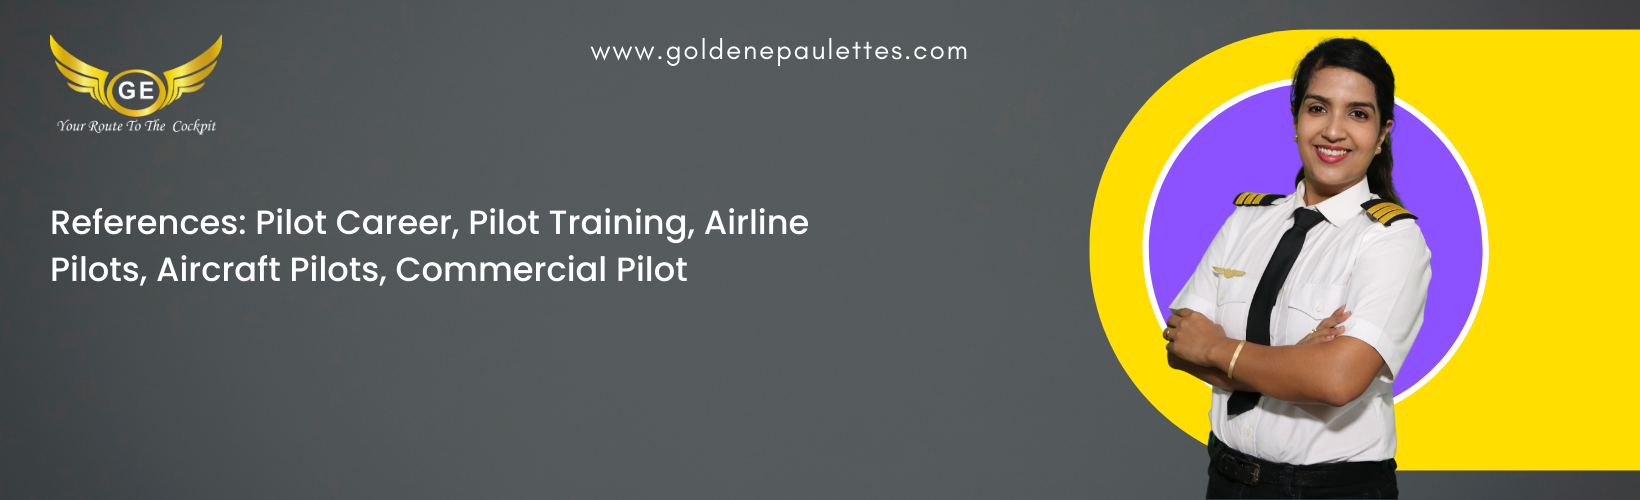 What Are the Job Opportunities for Commercial Pilots in India After 10th Grade